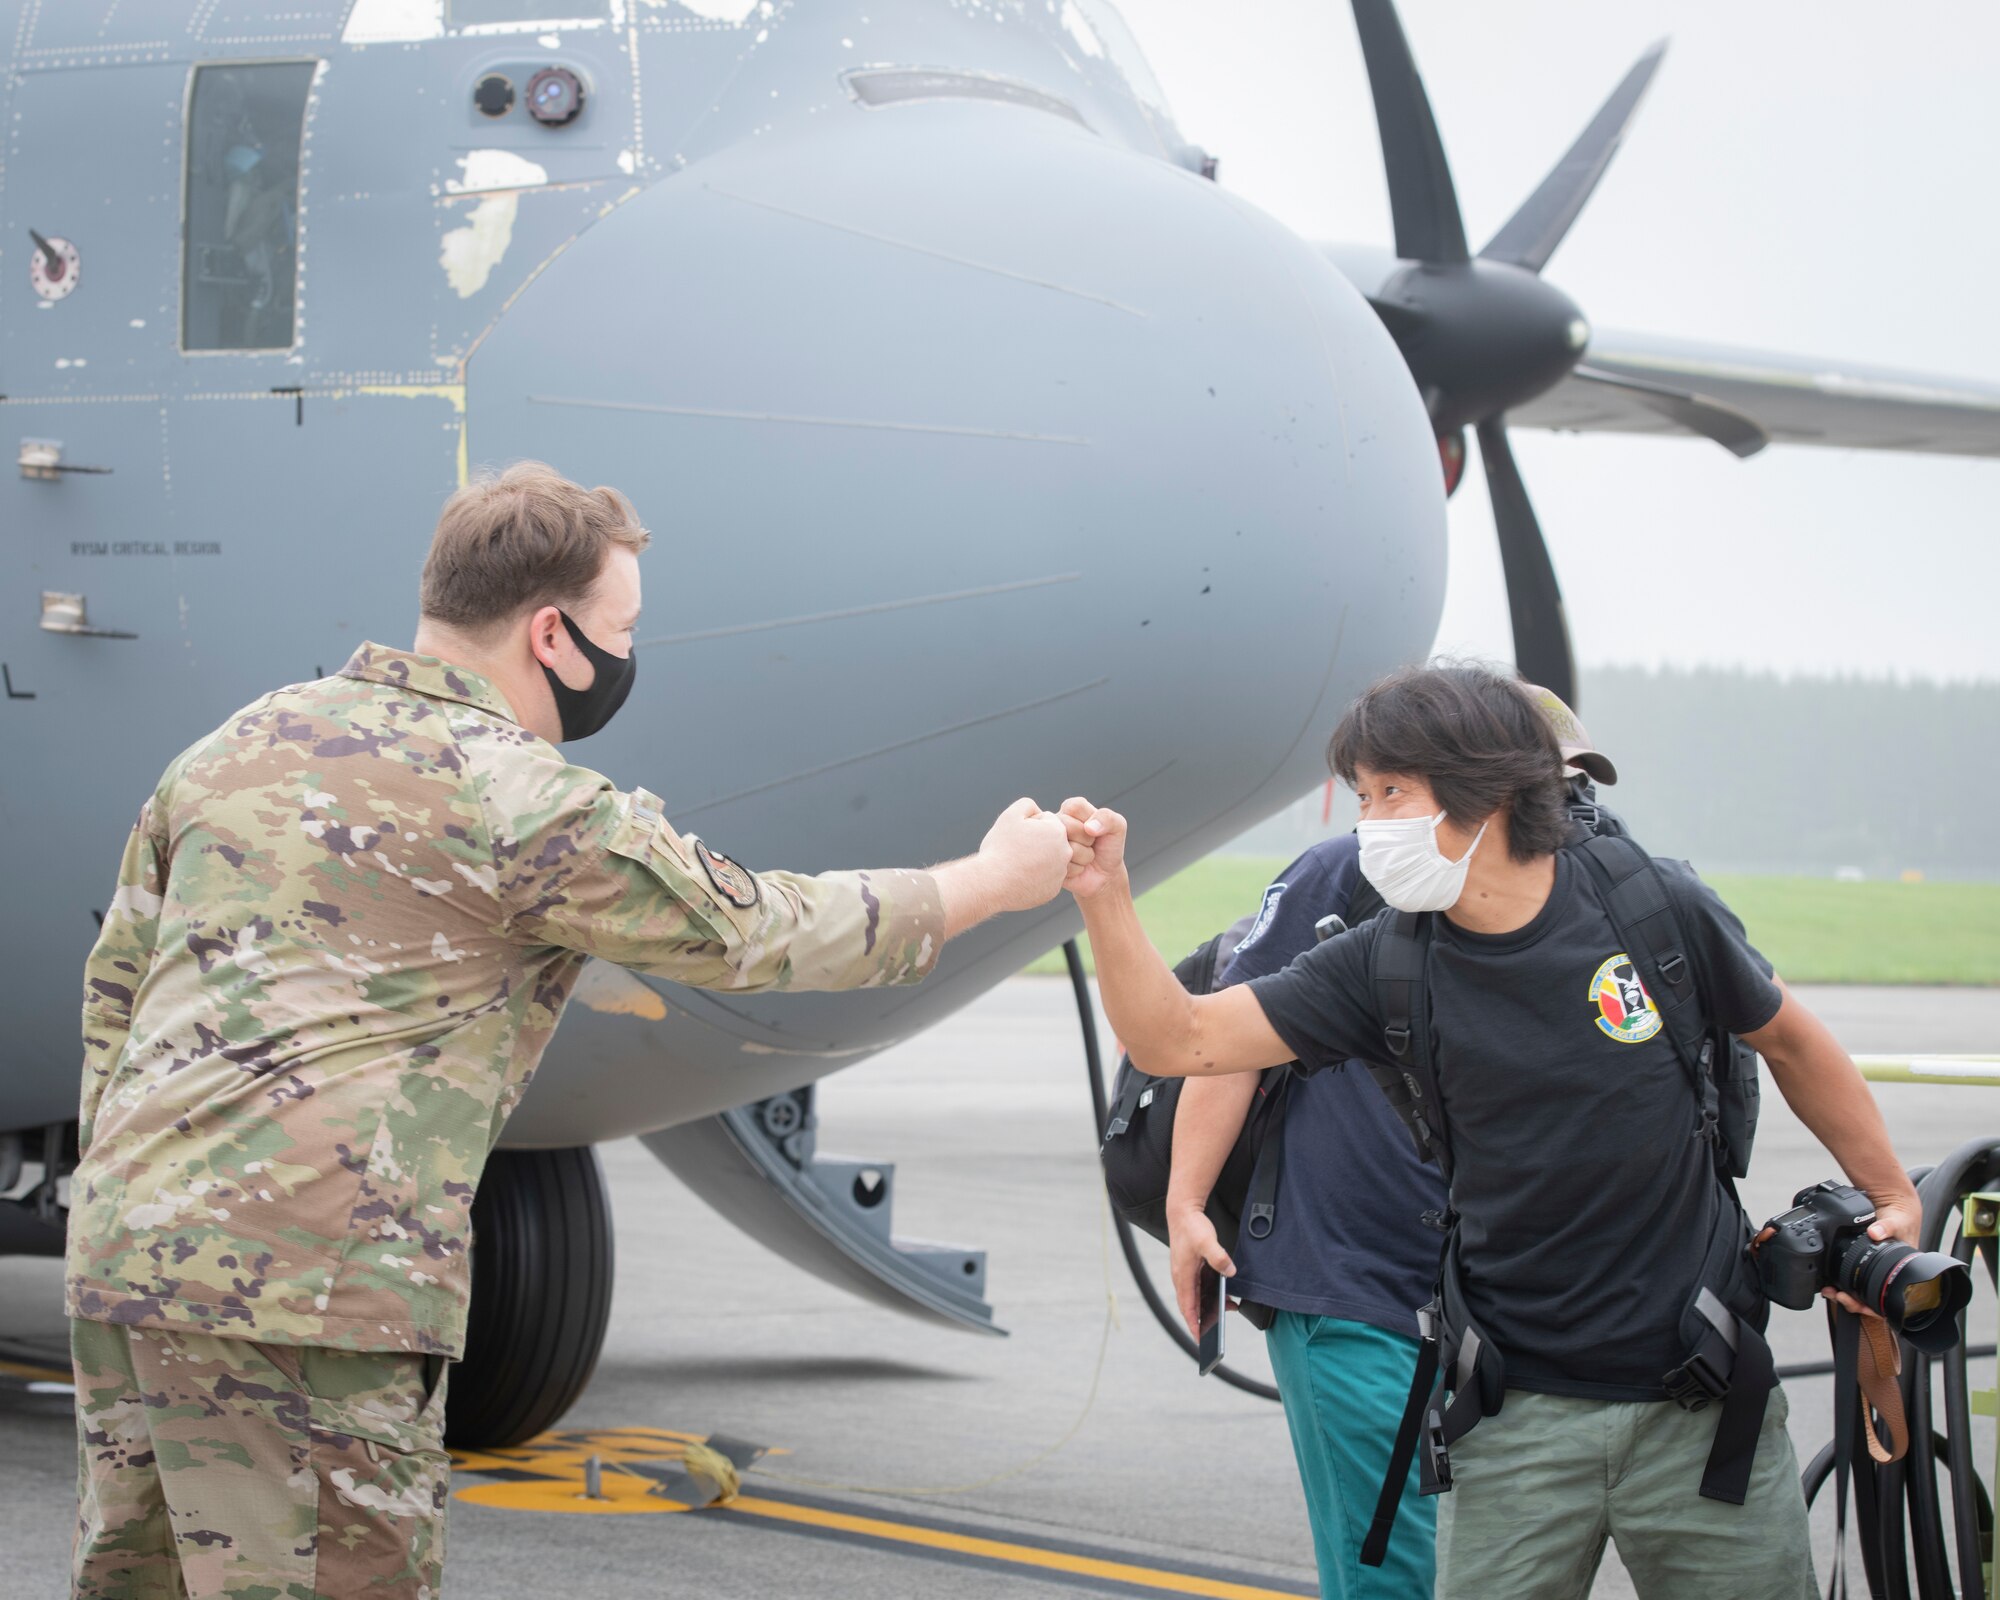 Airman 1st Class Spencer Kans, 36th Airlift Squadron loadmaster, bumps fists with a local area aviation enthusiast during a tour at Yokota Air Base, Japan, Aug. 31, 2022.